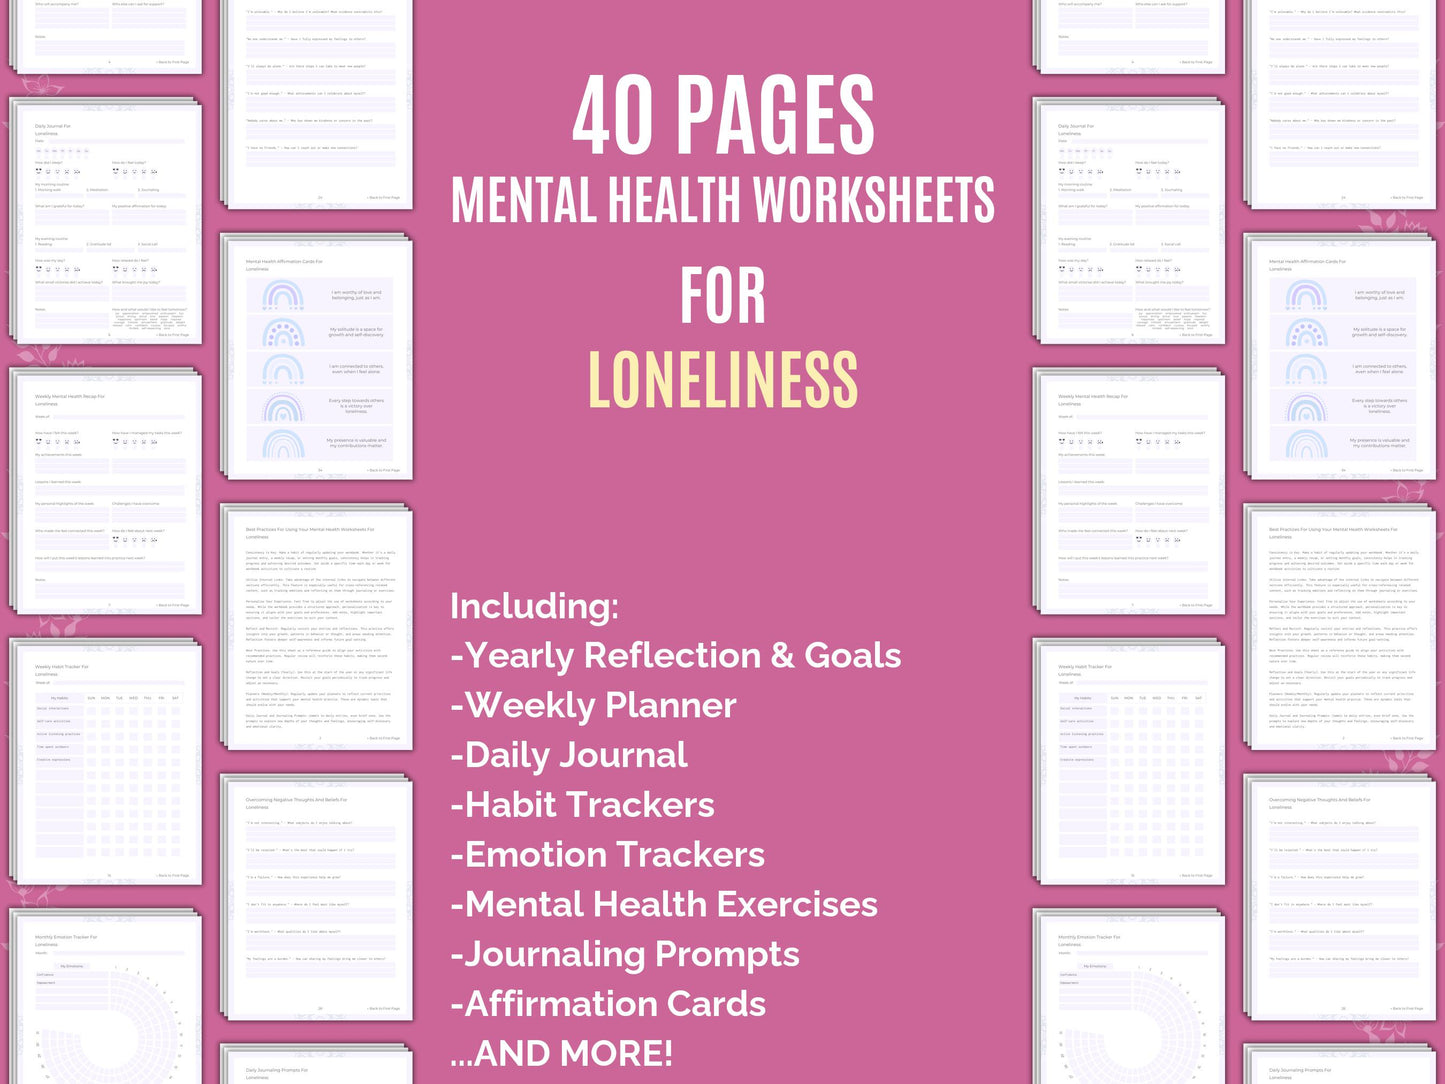 Counseling, Loneliness Templates, Goal Setting, Loneliness Therapy, Loneliness Workbooks, Cheat Sheet, Journaling, Loneliness Journals, Loneliness Planners, Loneliness Tools, Loneliness Resources, Loneliness Notes, Loneliness Mental Health